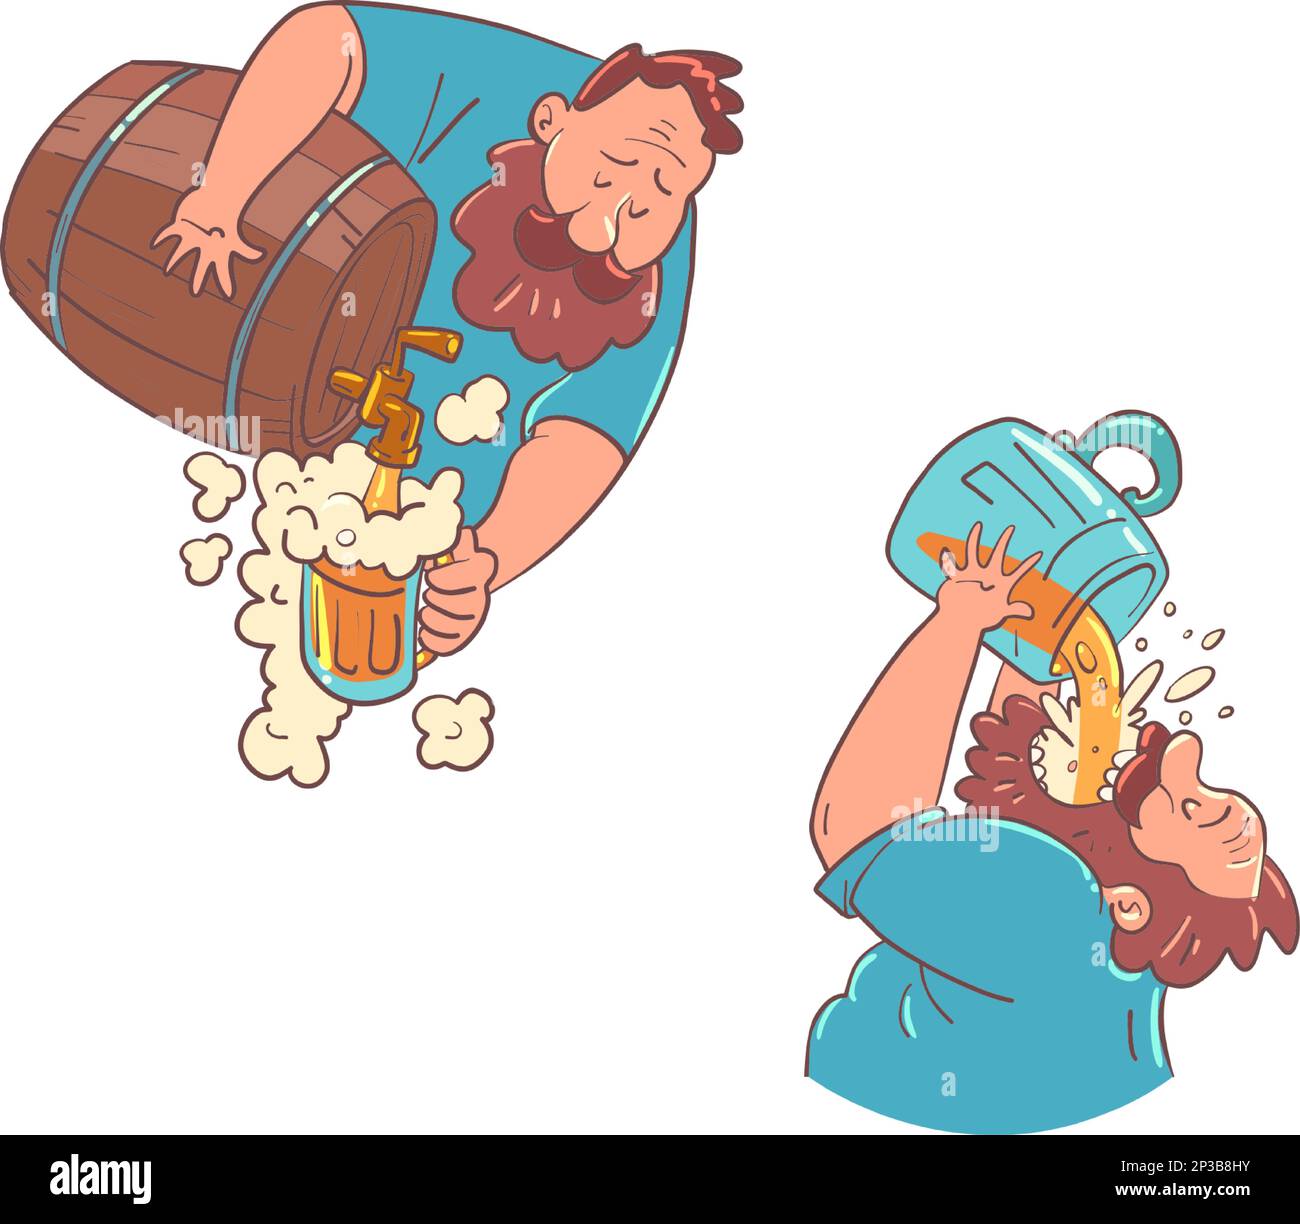 beer festival, oktoberfest, pub A man with a beard in a blue T-shirt drinks a keg of beer. Alcohol consumption. Stock Vector